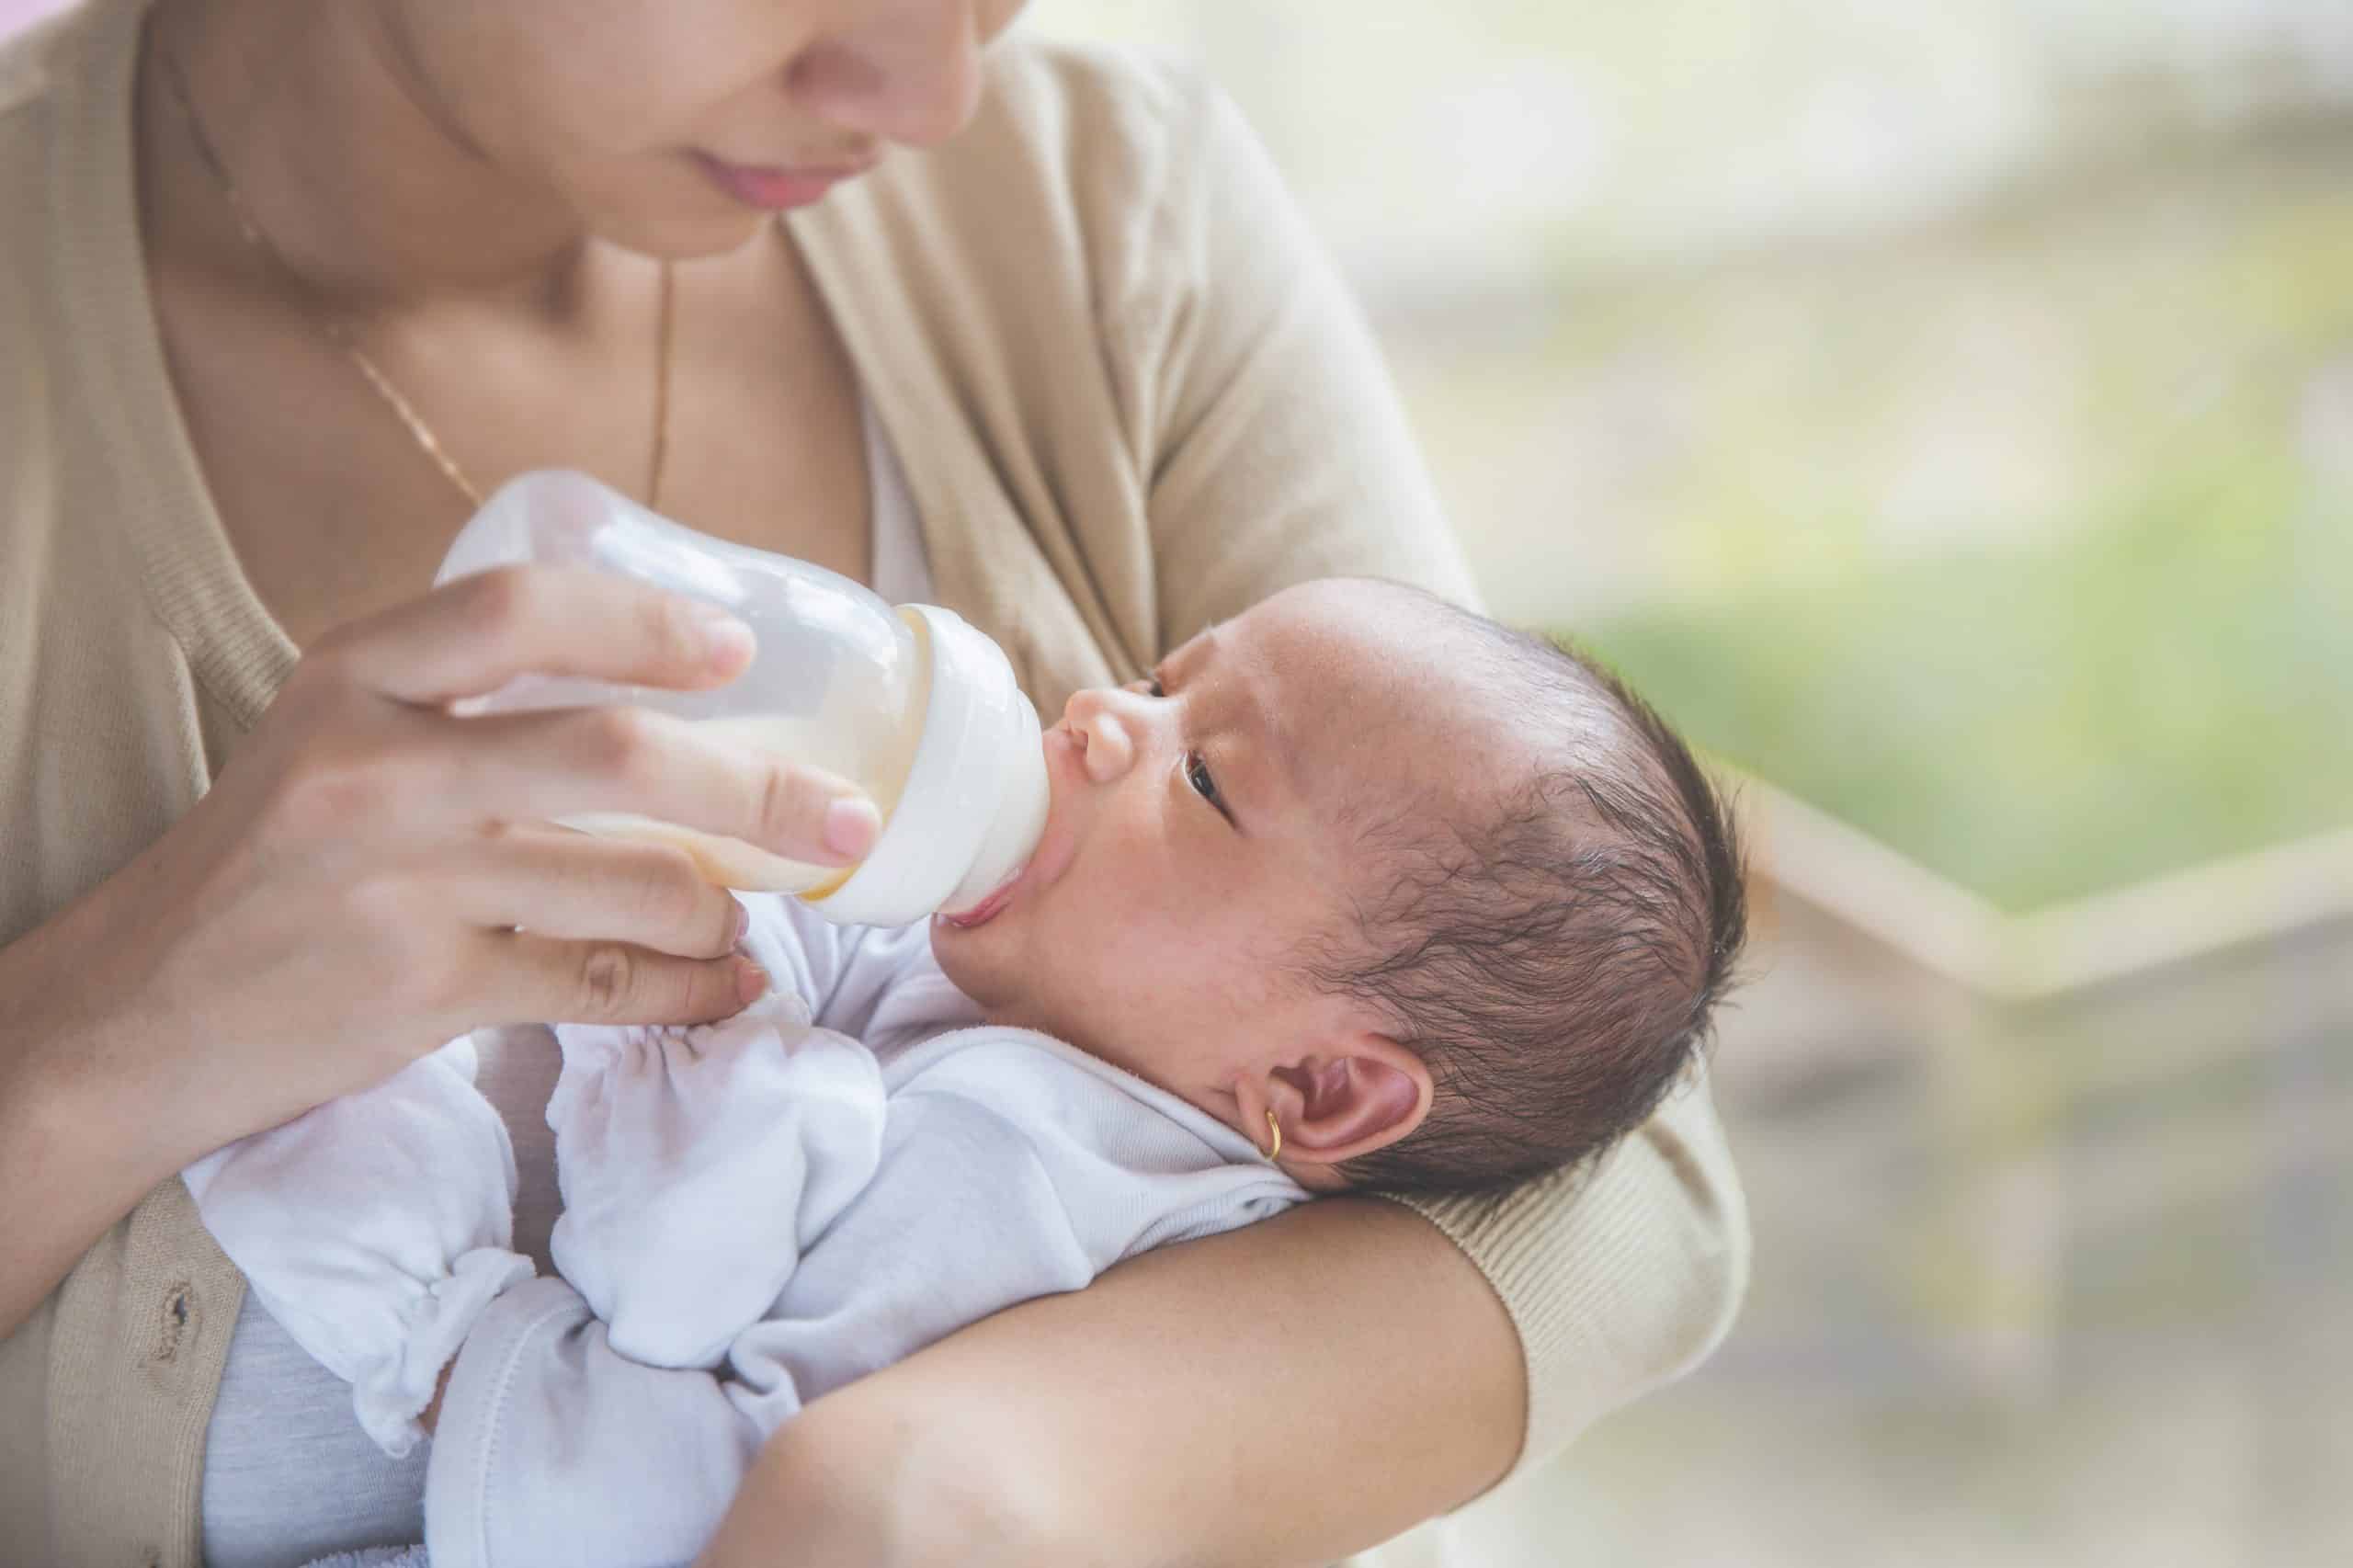 how to bottle feed a baby